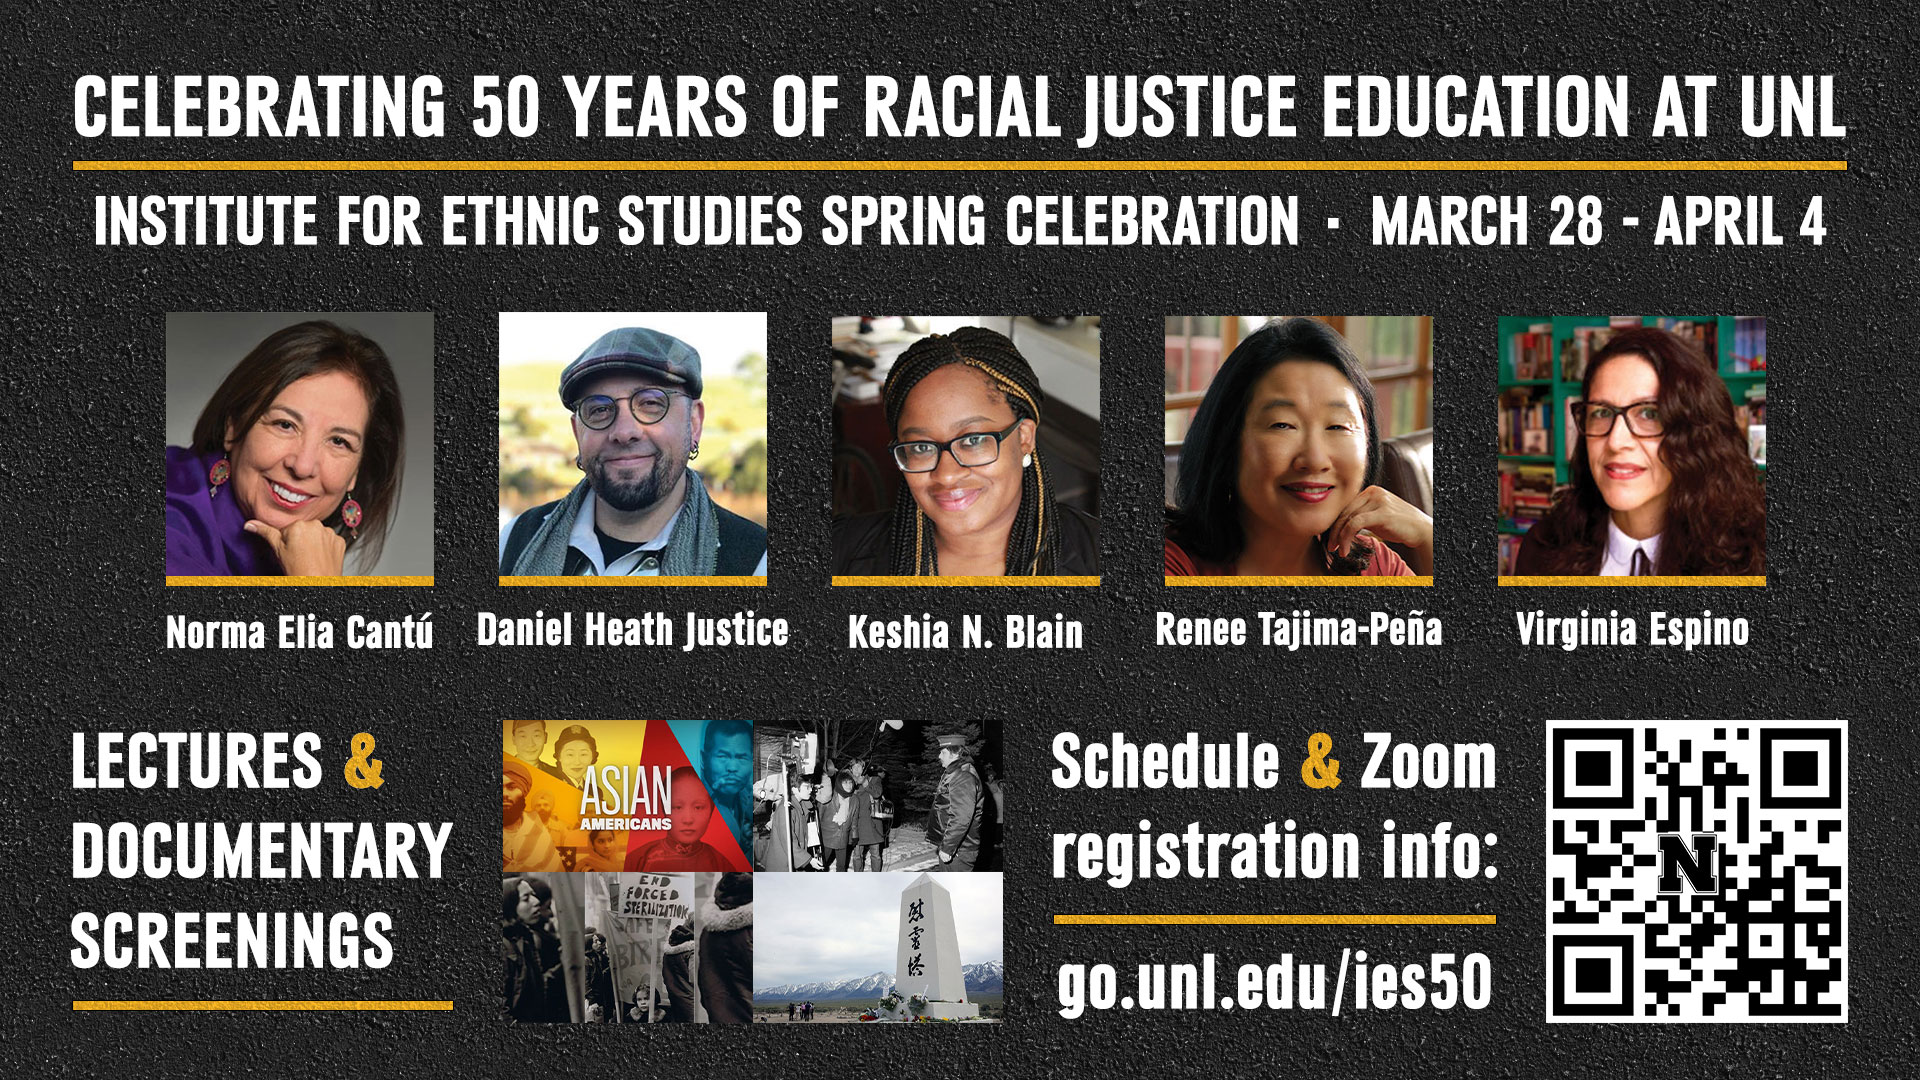 Institute for Ethnic Studies to celebrate 50 years of racial justice education